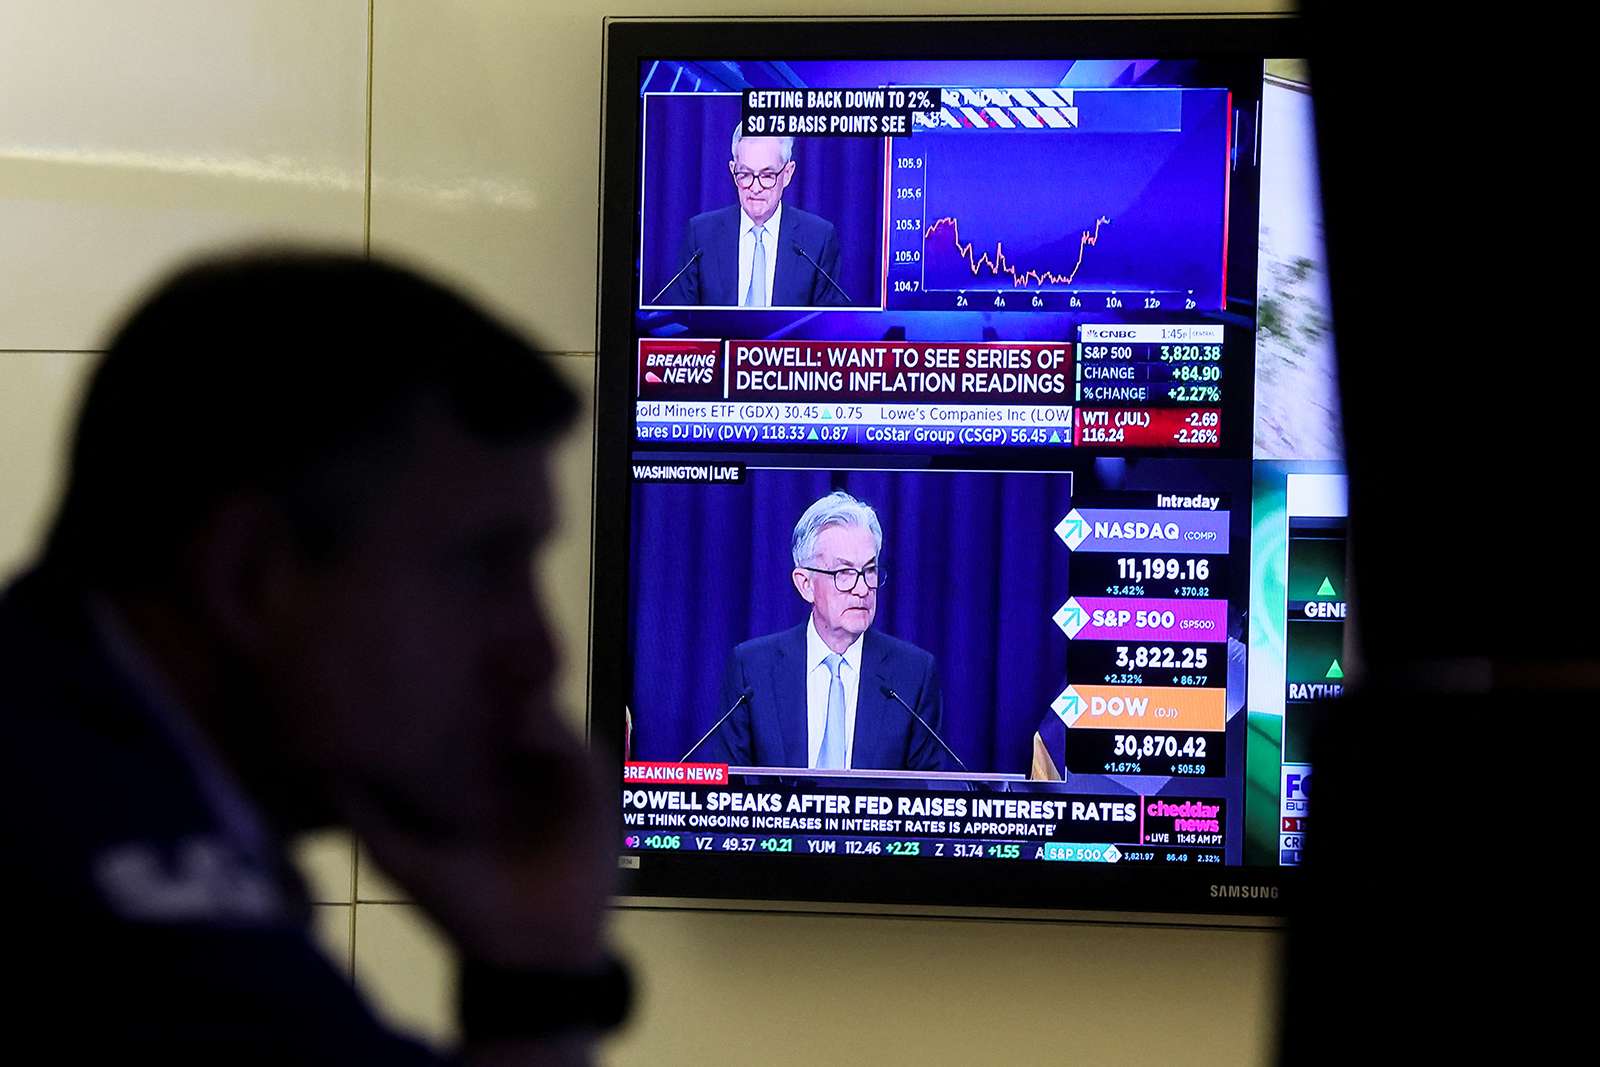 Traders work, as Federal Reserve Chair Jerome Powell is seen delivering remarks on a screen on the floor of the New York Stock Exchange in New York City, on June 15.